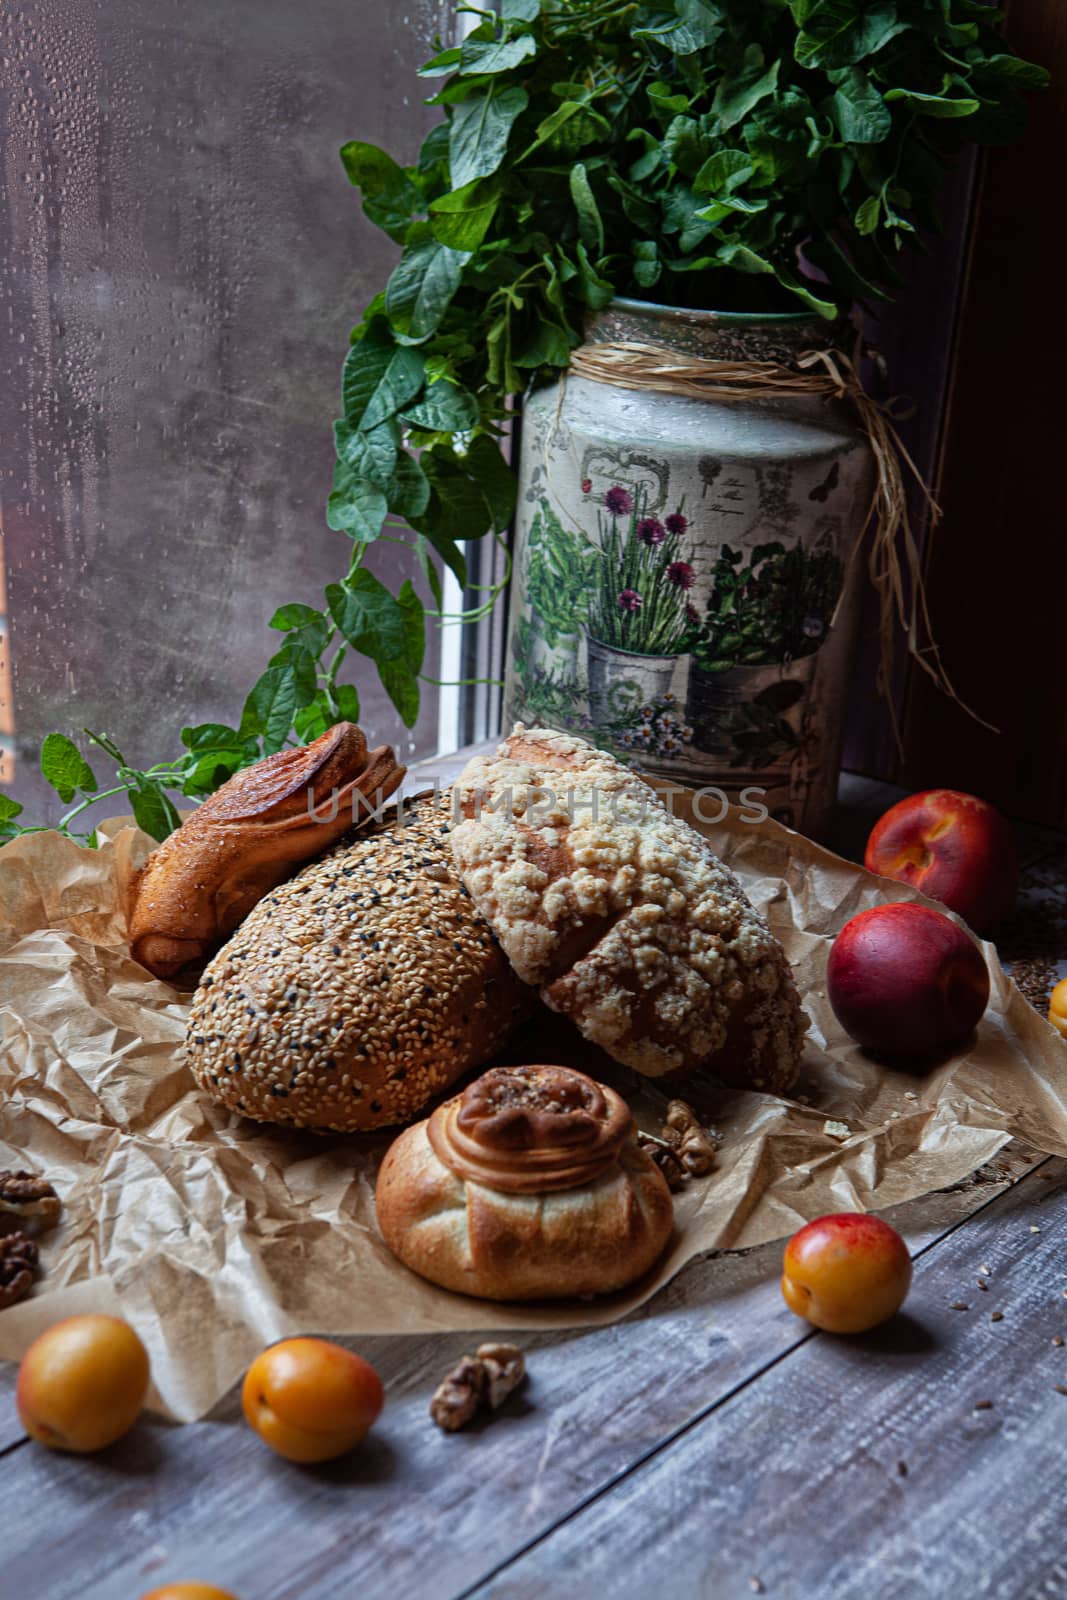 Bread And Fruits by Fotoskat